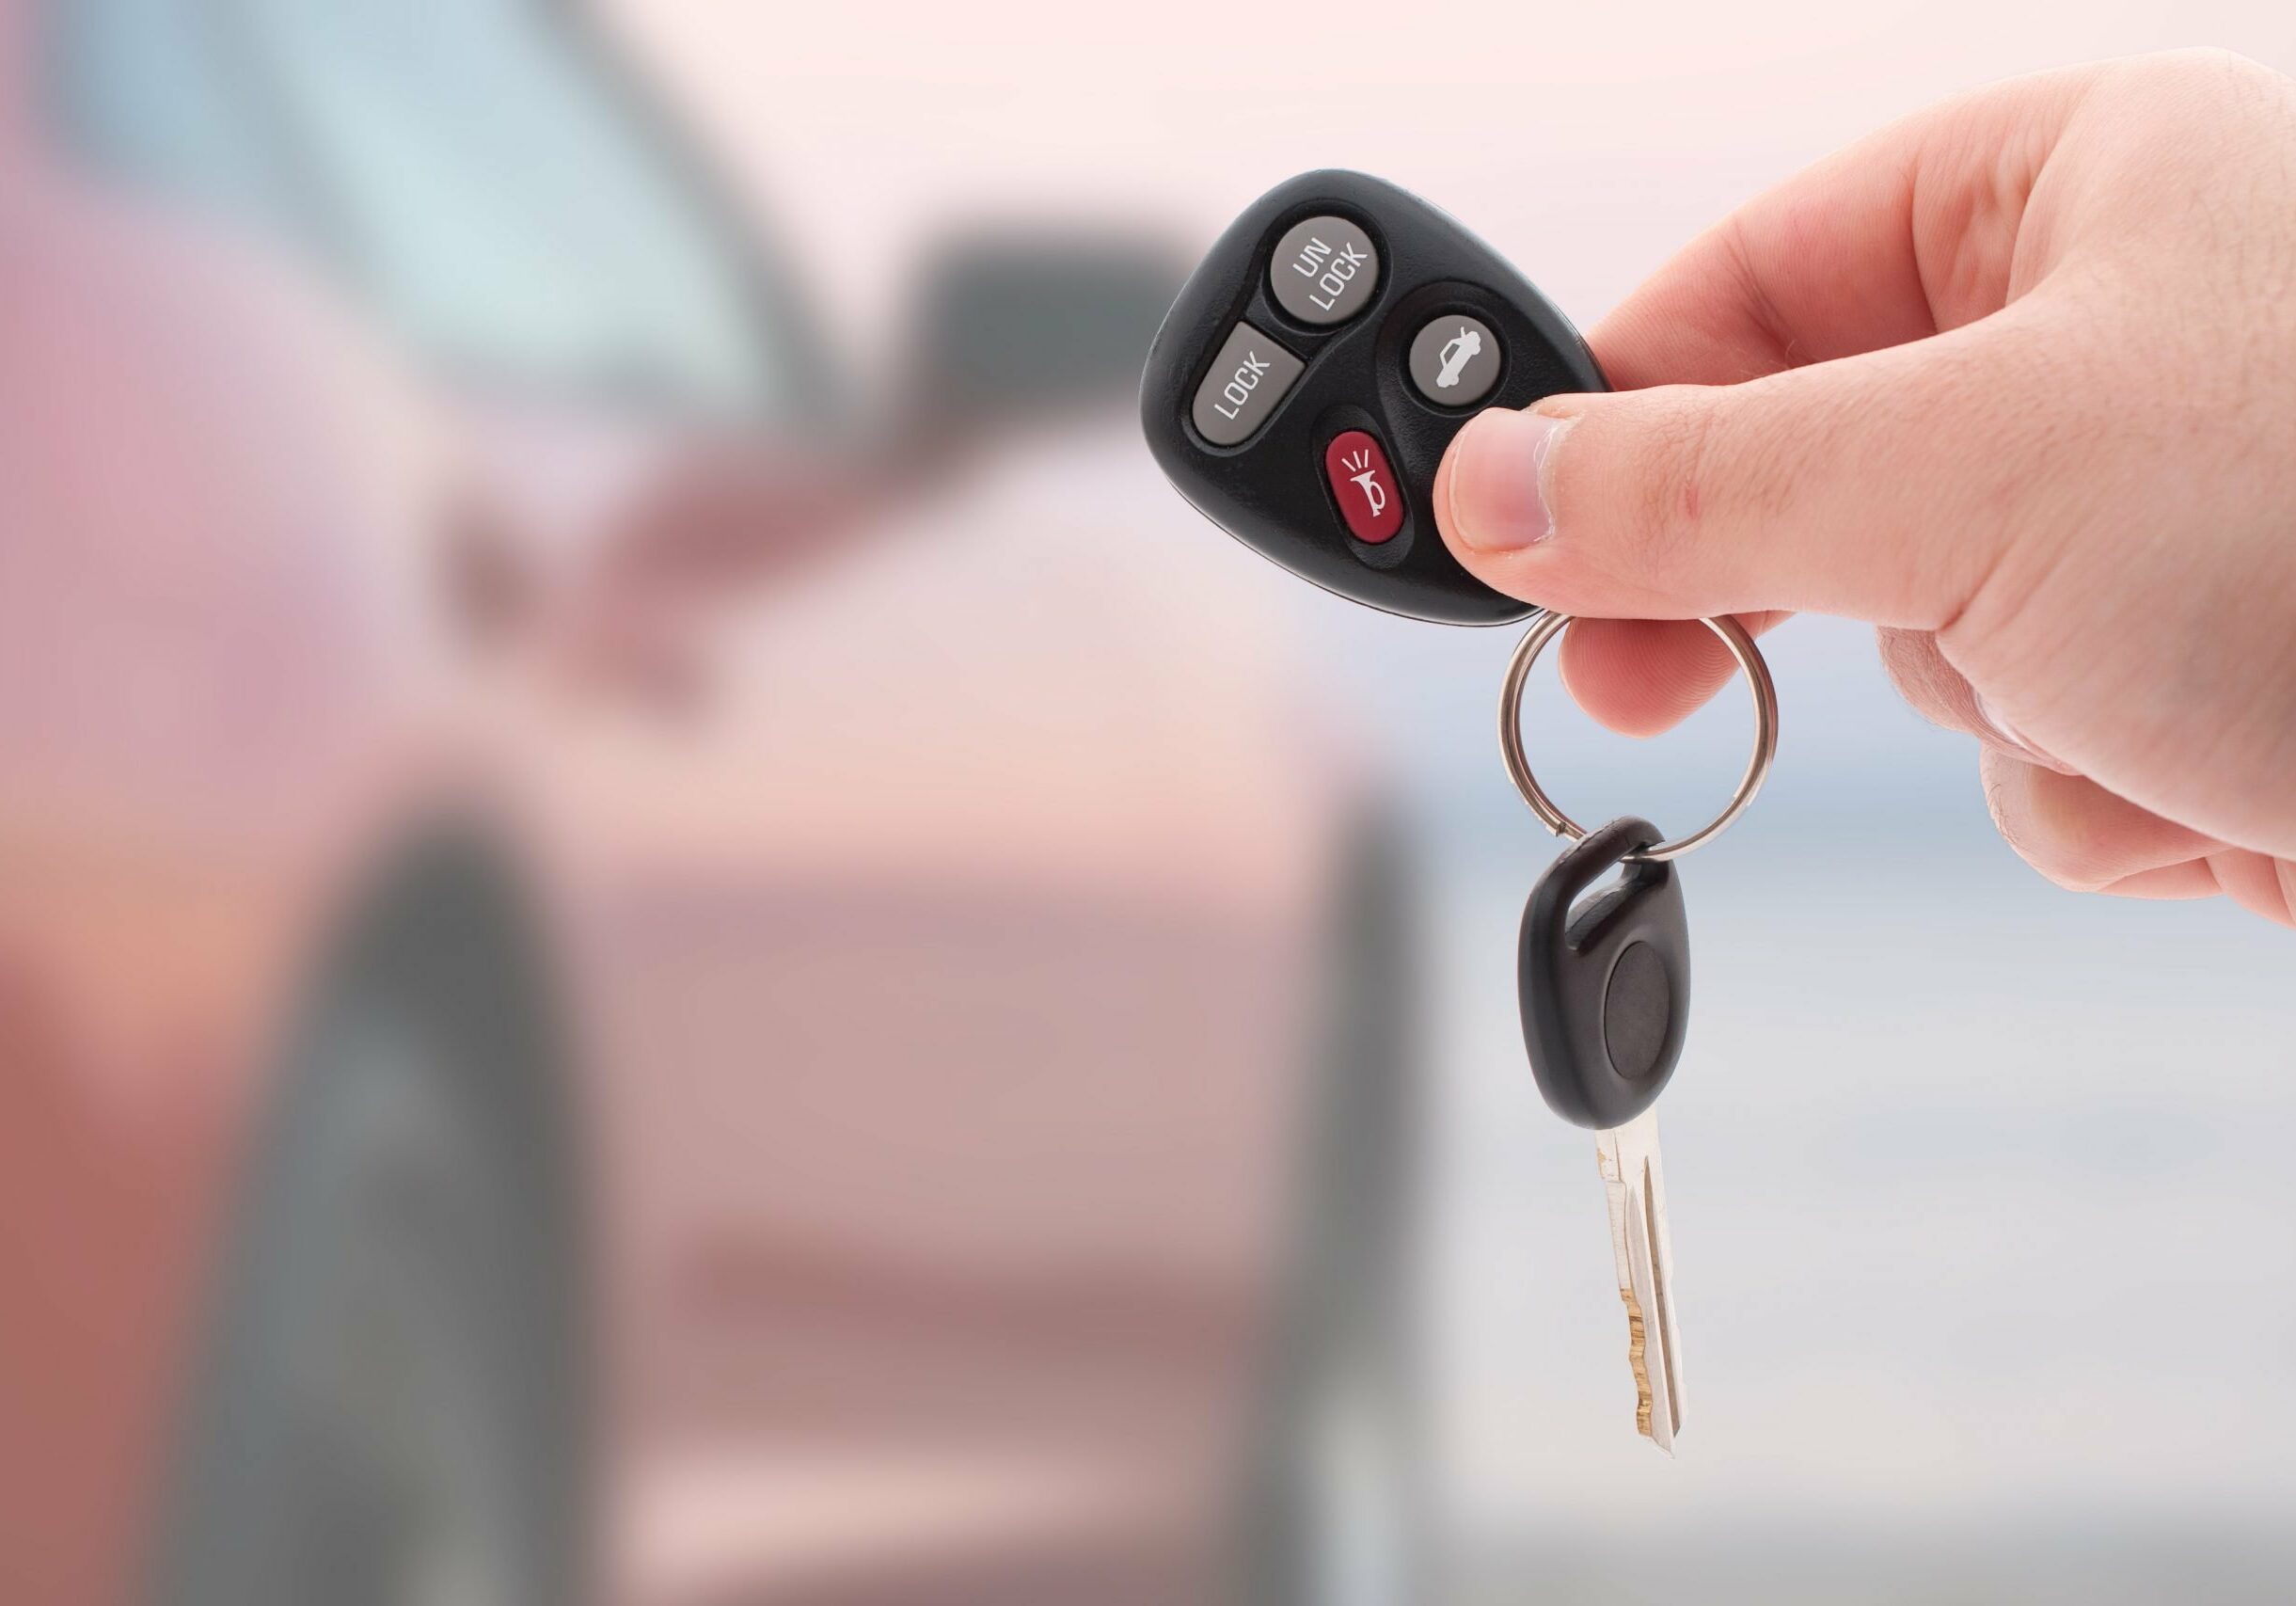 A hand holding car keys and a remote control for keyless entry.